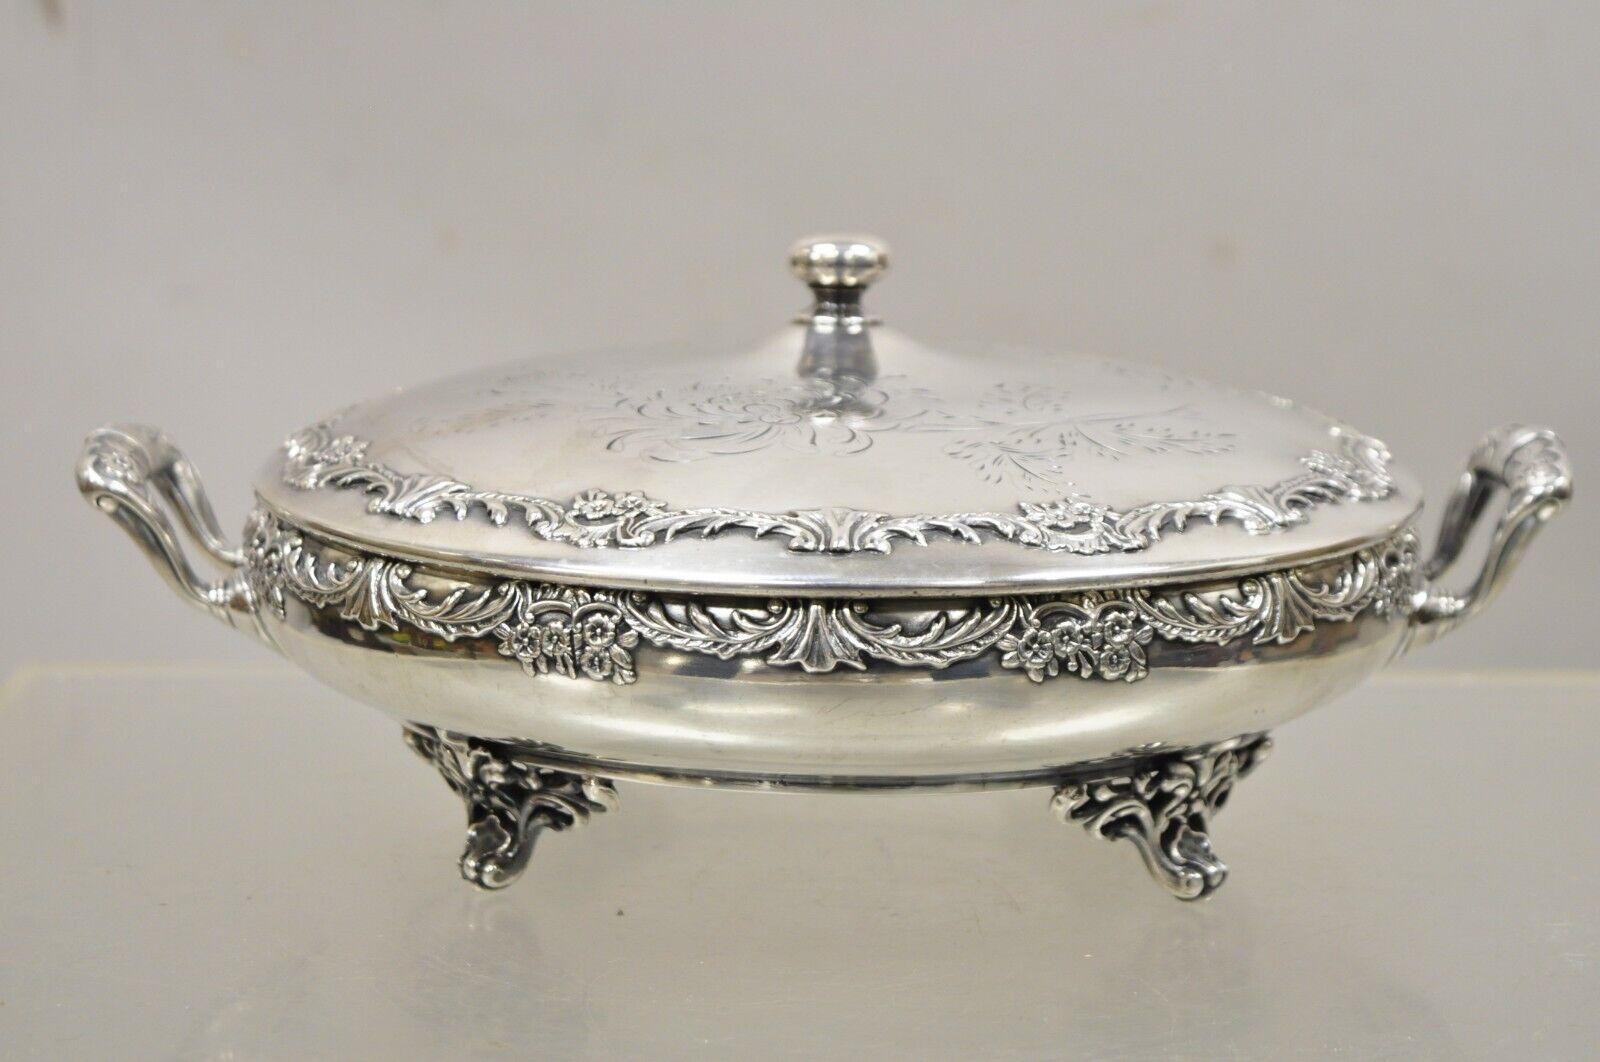 Reed & Barton Victorian Silver Plated Round Lidded Twin Handle Serving Dish. Item features an ornate lid, twin handles, raised on fancy feet, very nice antique item, quality English craftsmanship, great style and form. Circa Early to Mid 1900s.